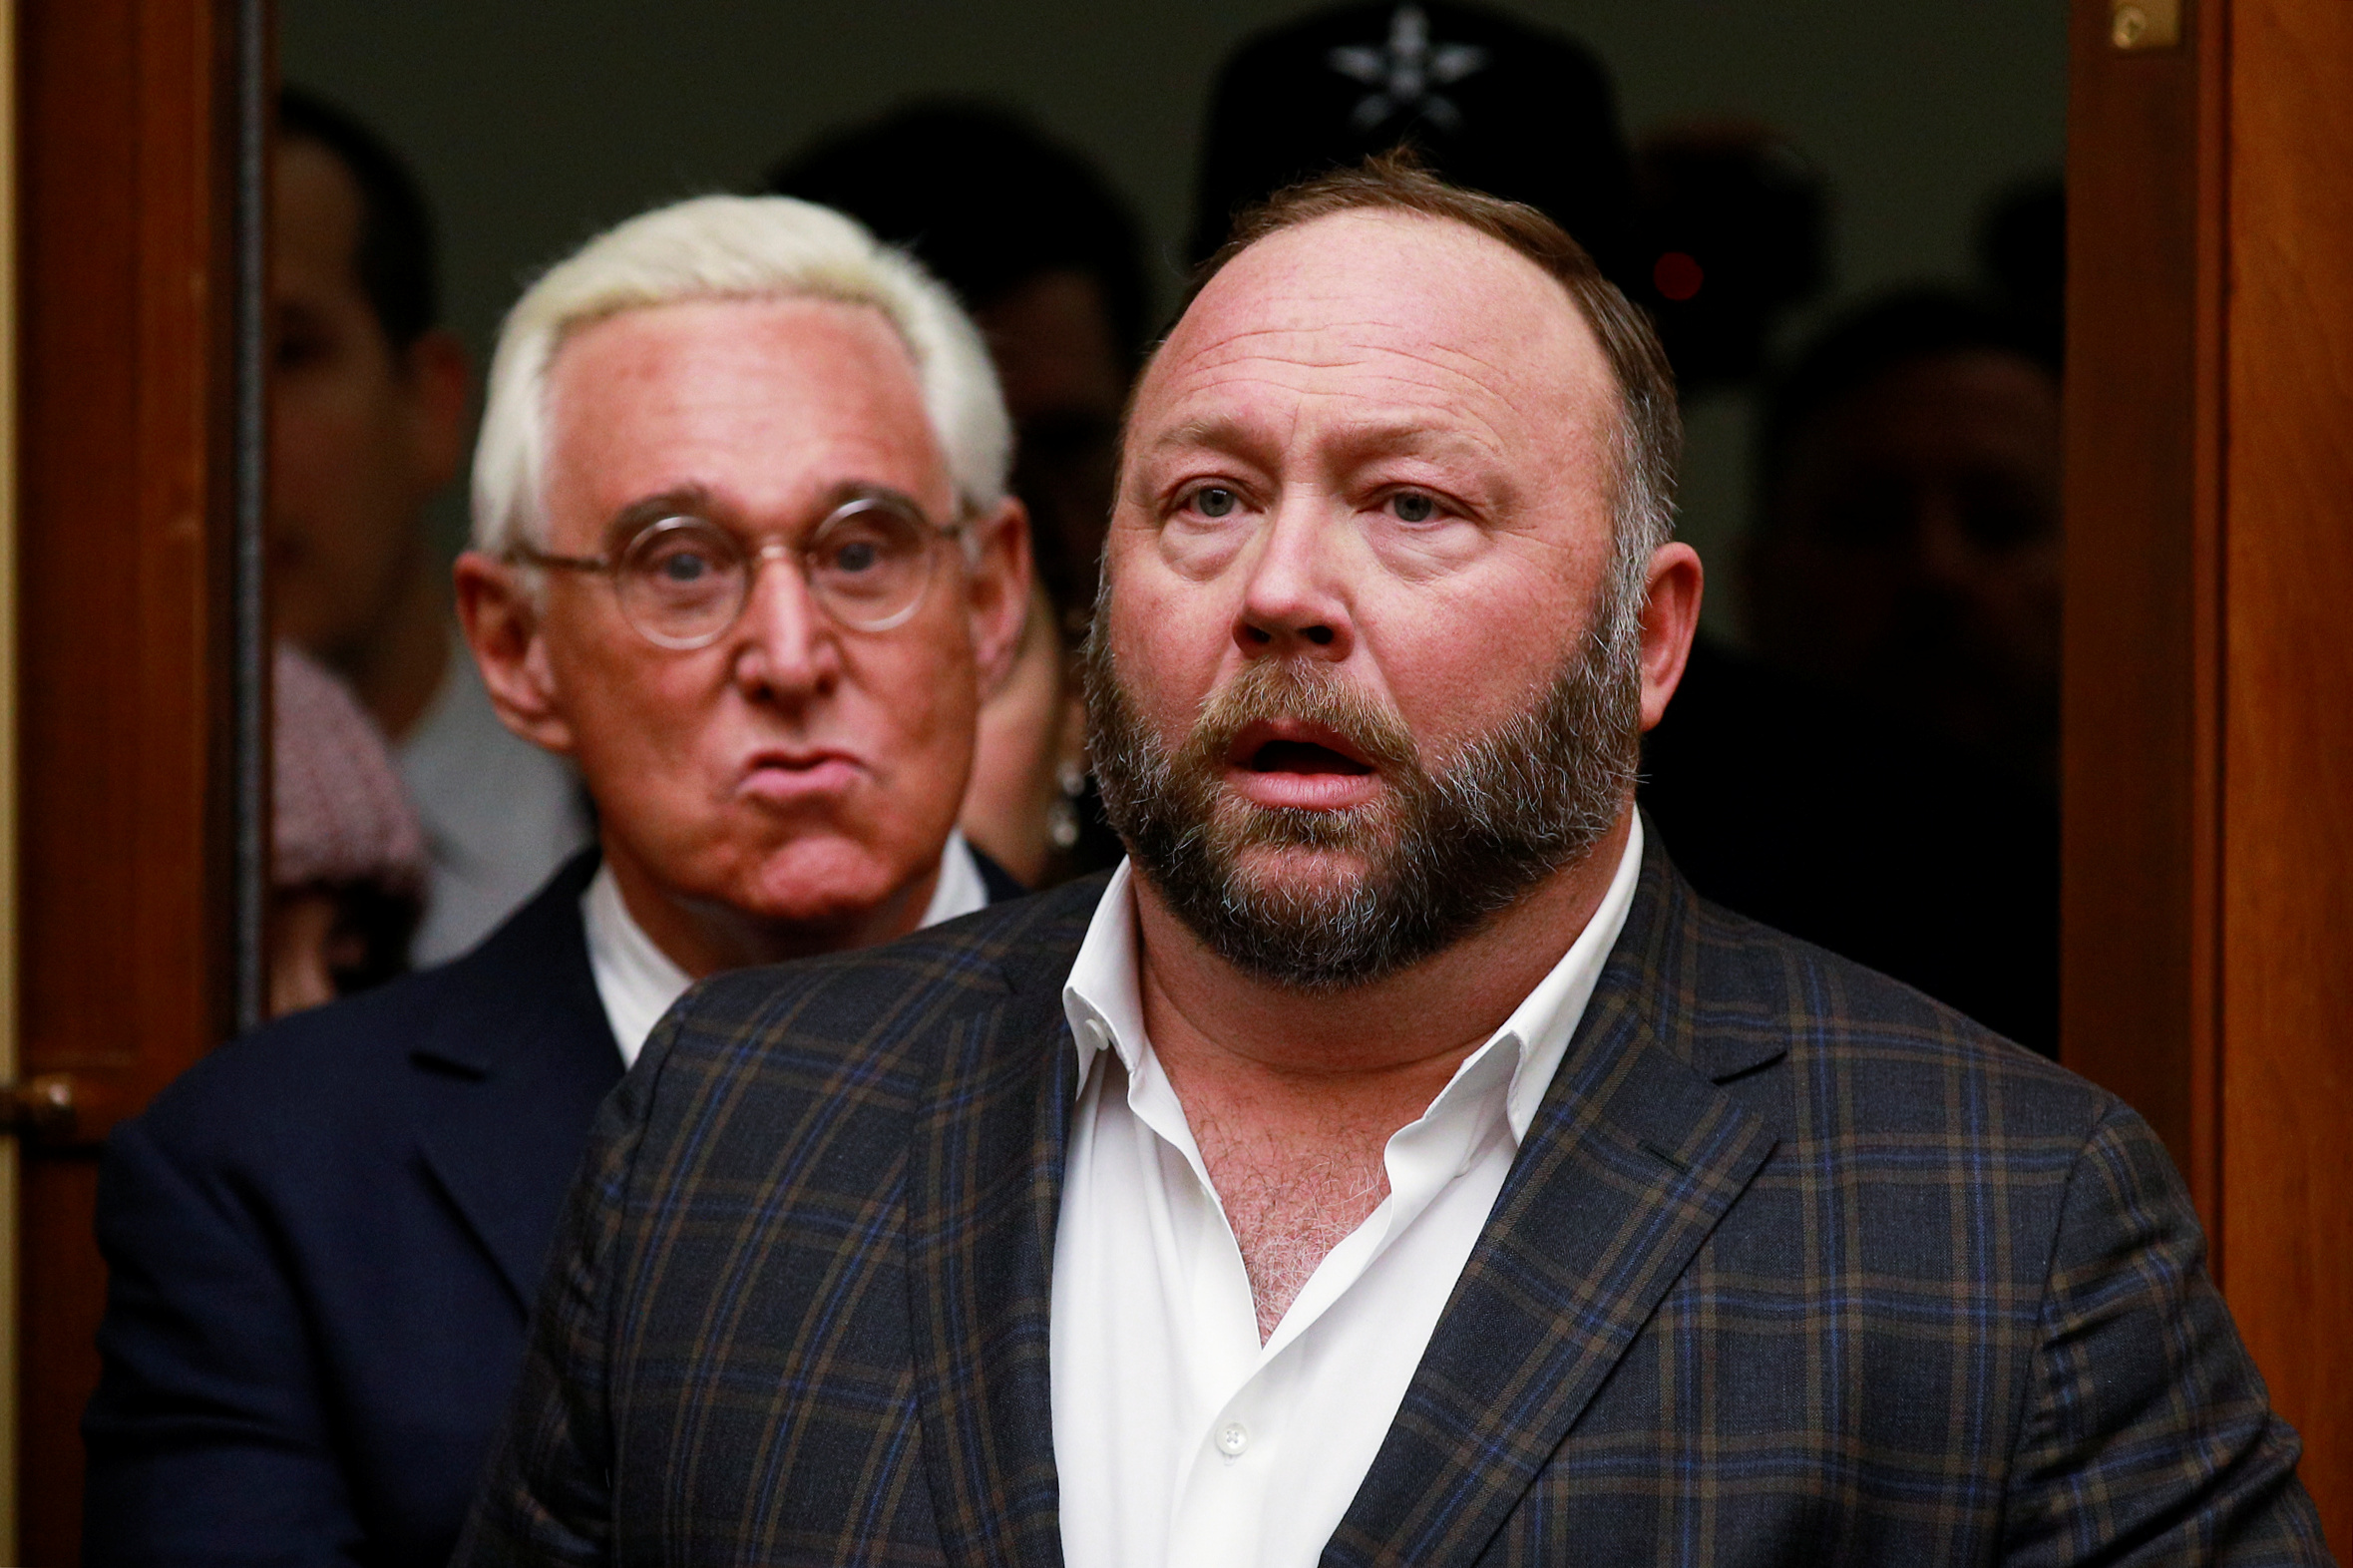 Alex Jones of Infowars is followed by political operative Roger Stone (L) prior to the testimony of Google CEO Sundar Pichai at a House Judiciary Committee hearing “examining Google and its Data Collection, Use and Filtering Practices” on Capitol Hill in Washington, U.S., December 11, 2018. REUTERS/Jim Young